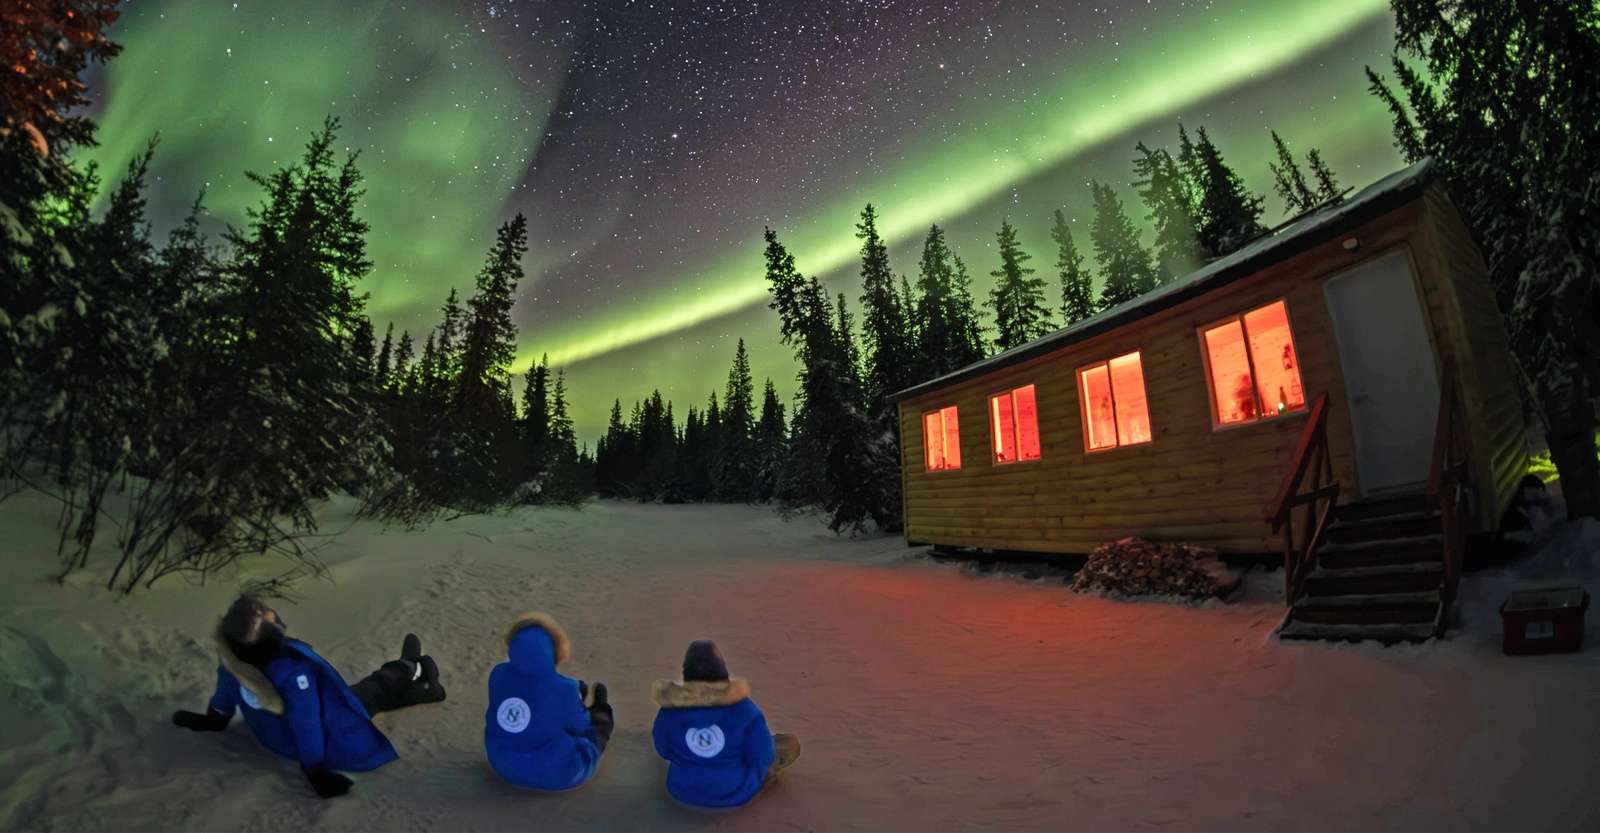 Nat Hab guests next to cabin viewing the northern lights, Churchill, Manitoba.